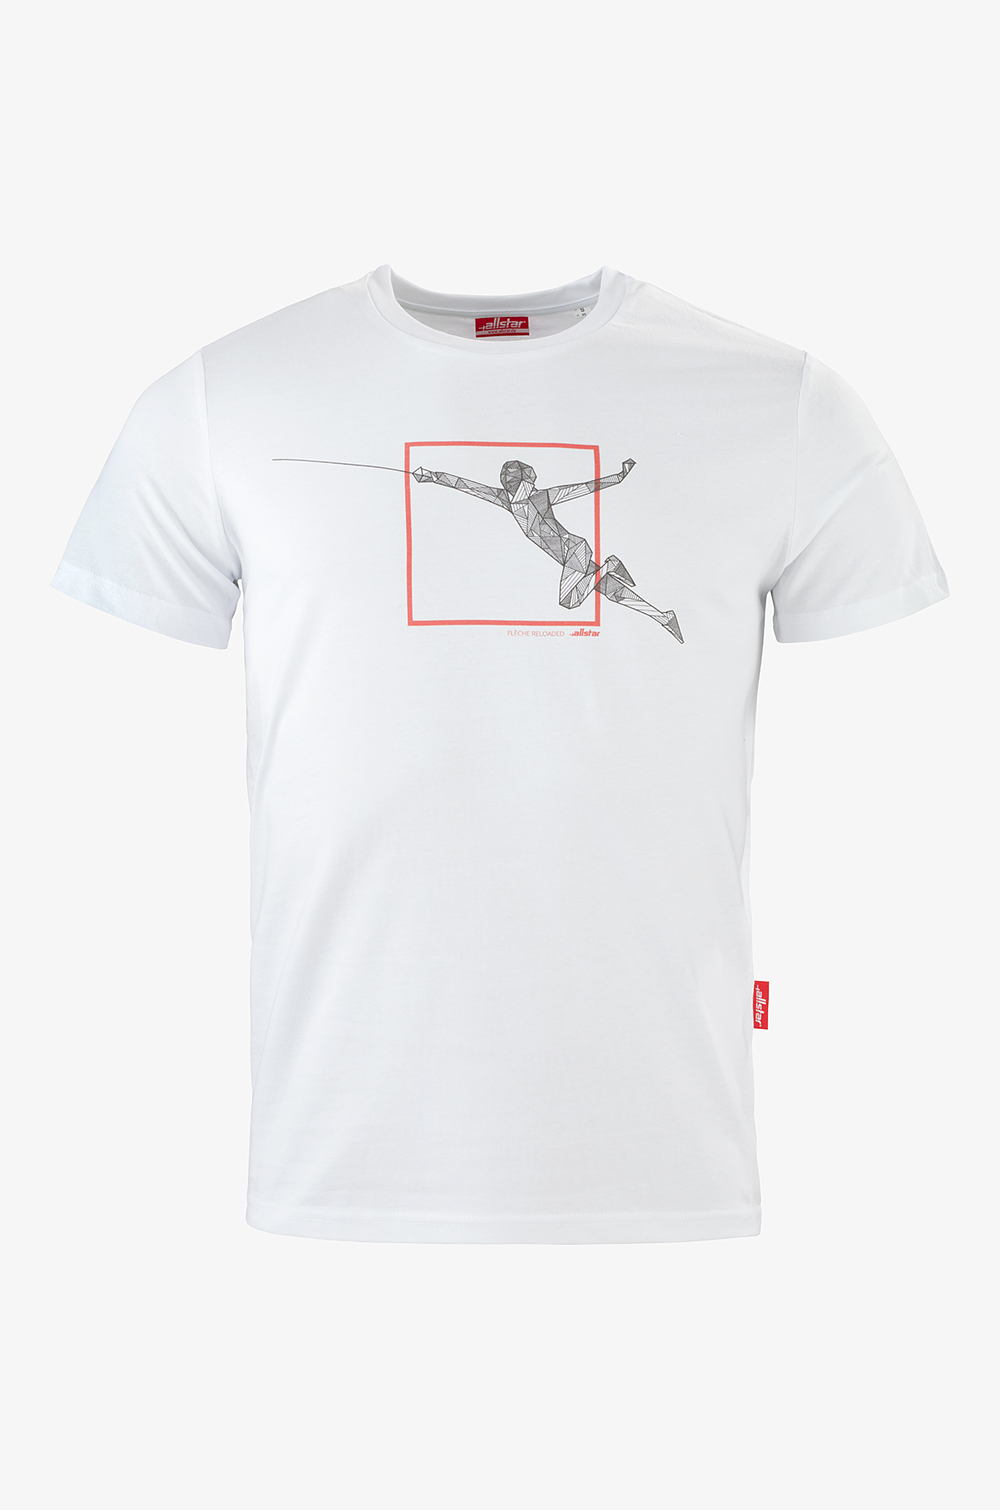 Flèche Reloaded 1.0 T-Shirt (white/red)